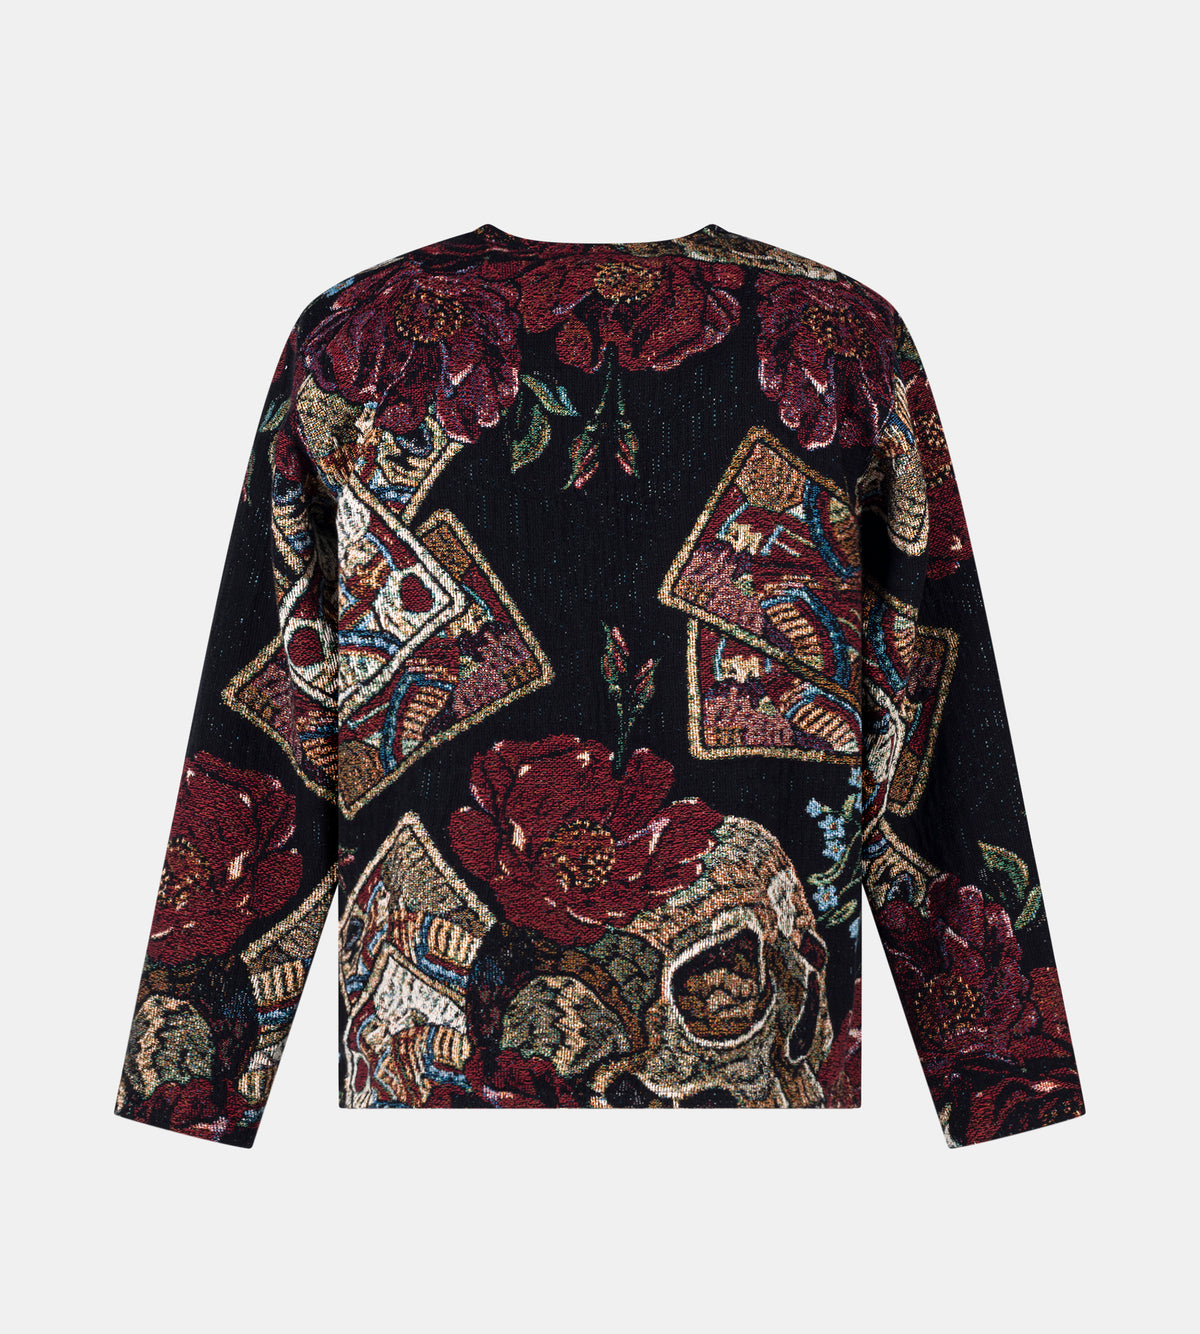 REIGN OF ROSES SWEATER